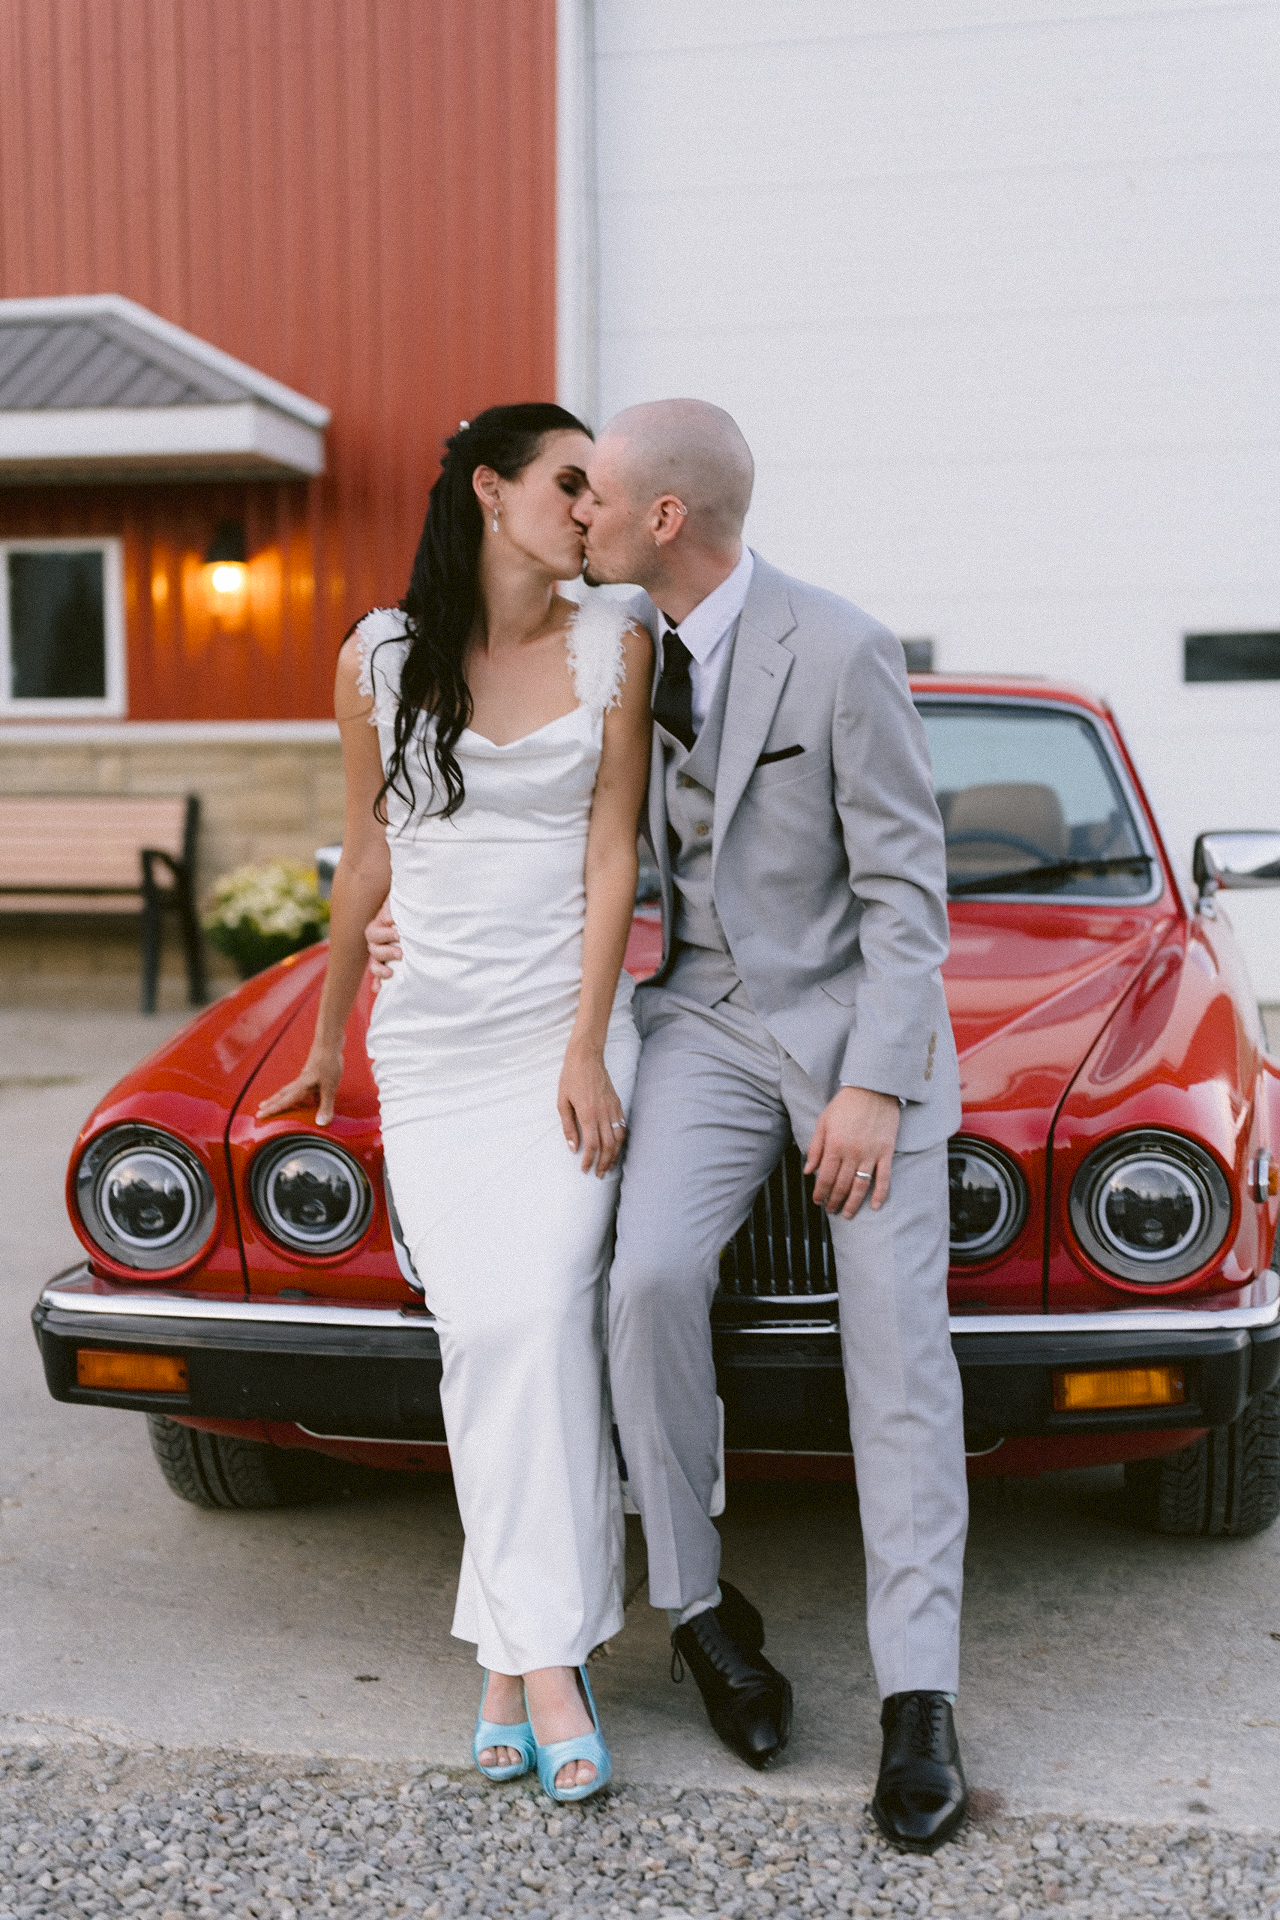 Newlyweds sharing a kiss in front of a classic red car.